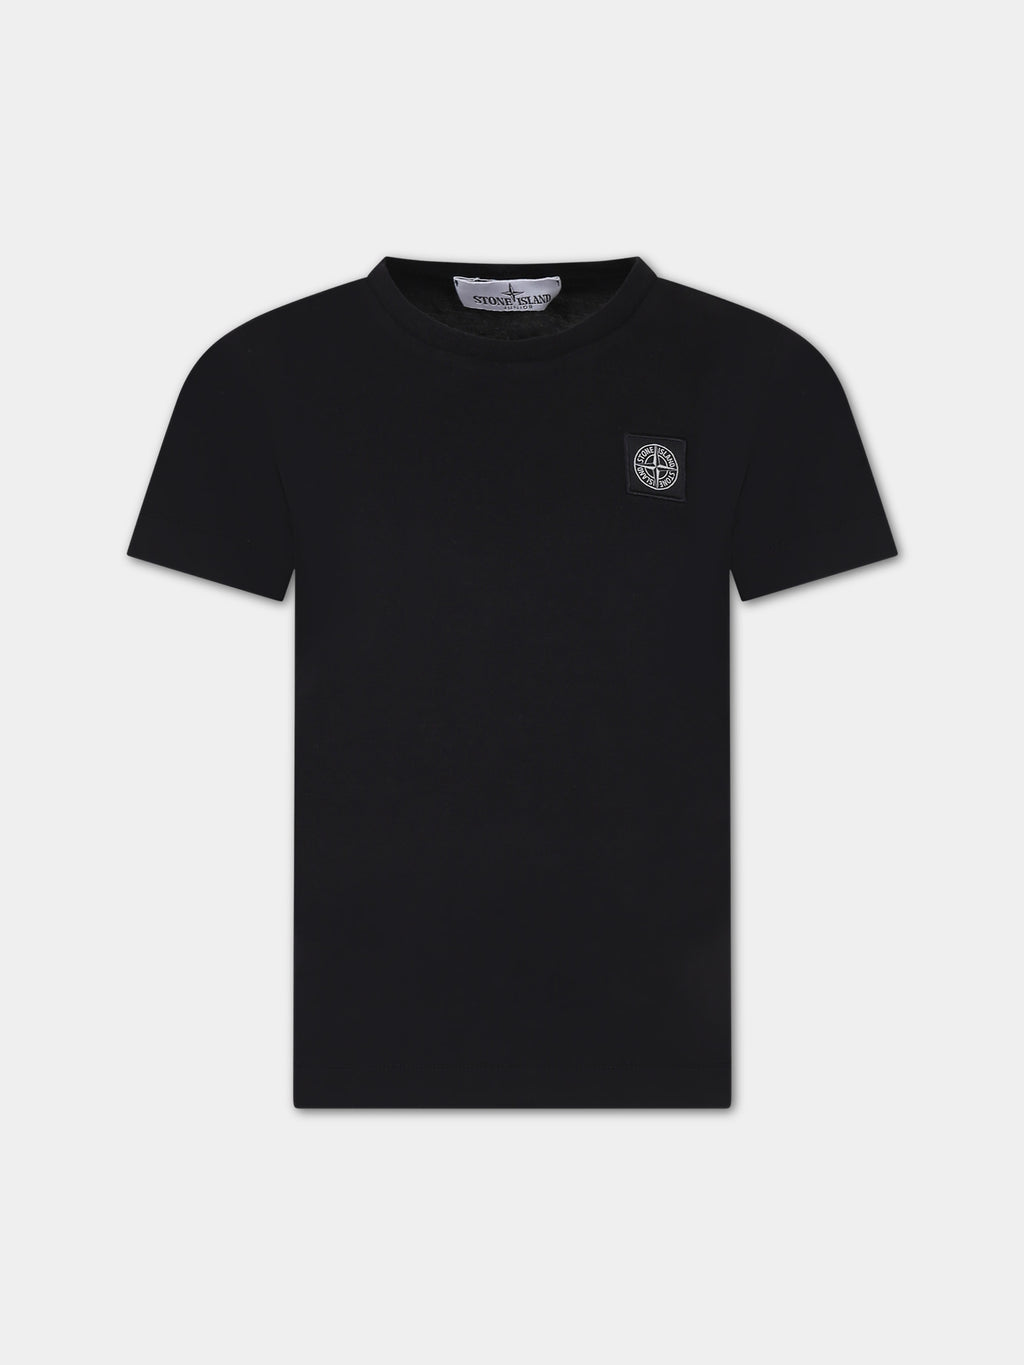 Black T-shirt fo boy with iconic compass